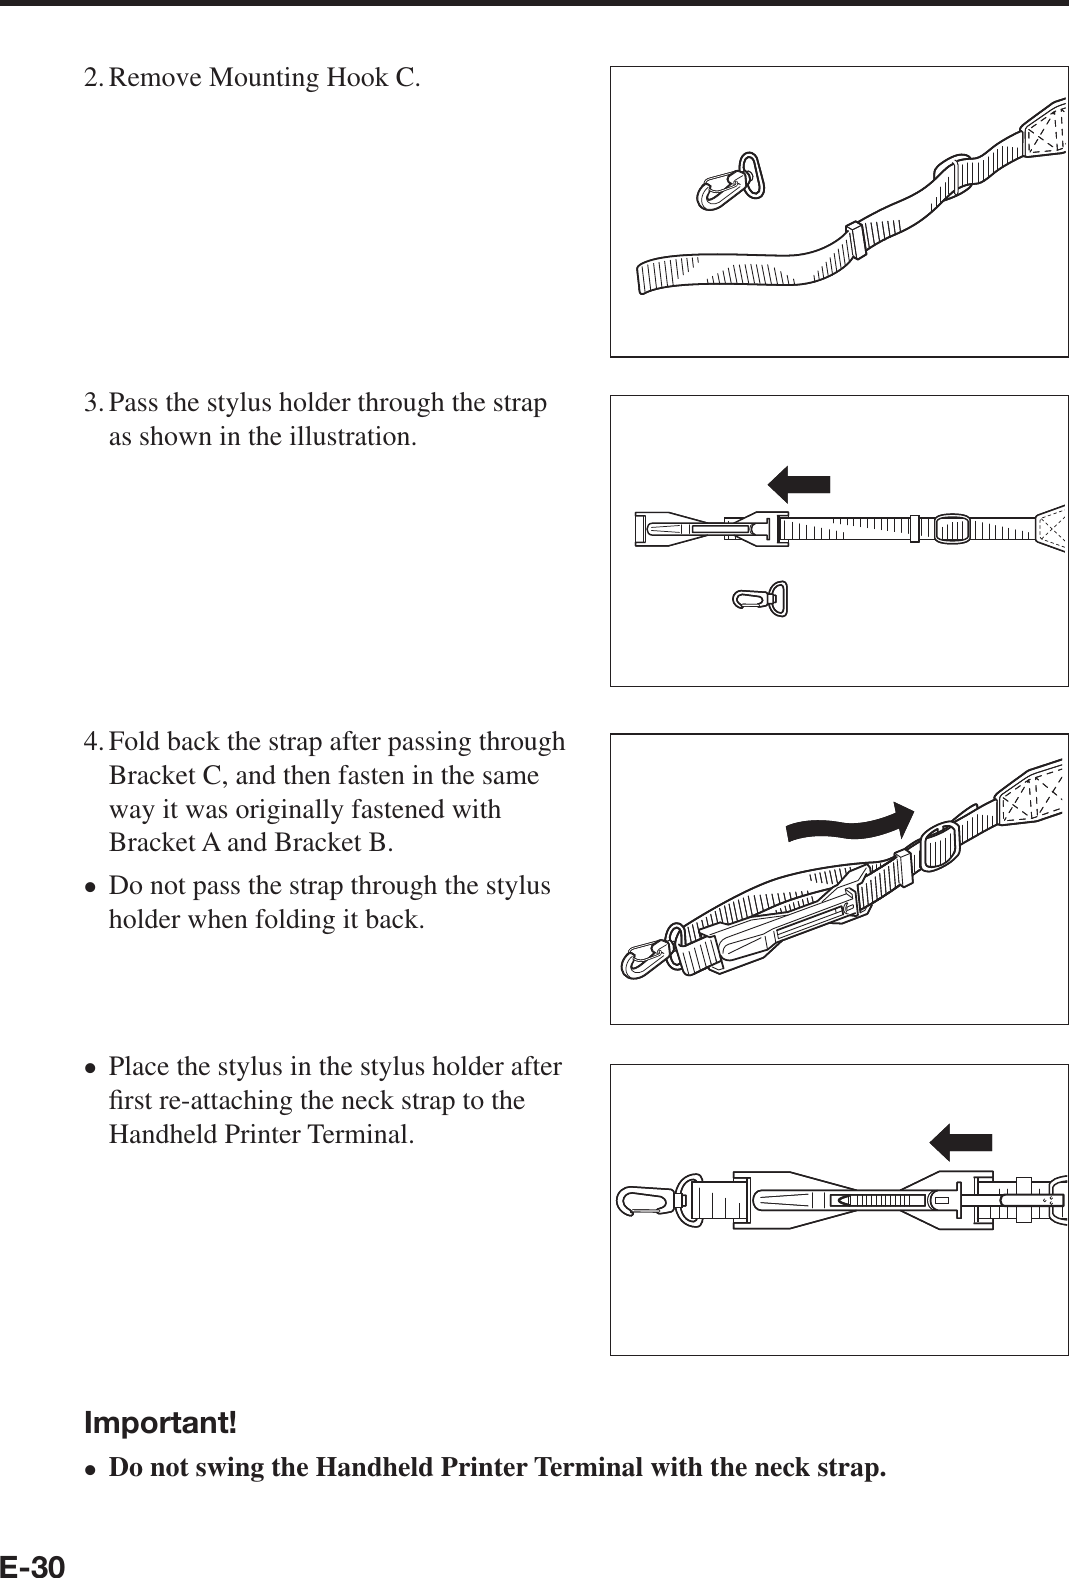 E-302. Remove Mounting Hook C.3. Pass the stylus holder through the strap as shown in the illustration.4. Fold back the strap after passing through Bracket C, and then fasten in the same way it was originally fastened with Bracket A and Bracket B.Do not pass the strap through the stylus holder when folding it back.Place the stylus in the stylus holder after ¿ rst re-attaching the neck strap to the Handheld Printer Terminal.Important!Do not swing the Handheld Printer Terminal with the neck strap.xxx